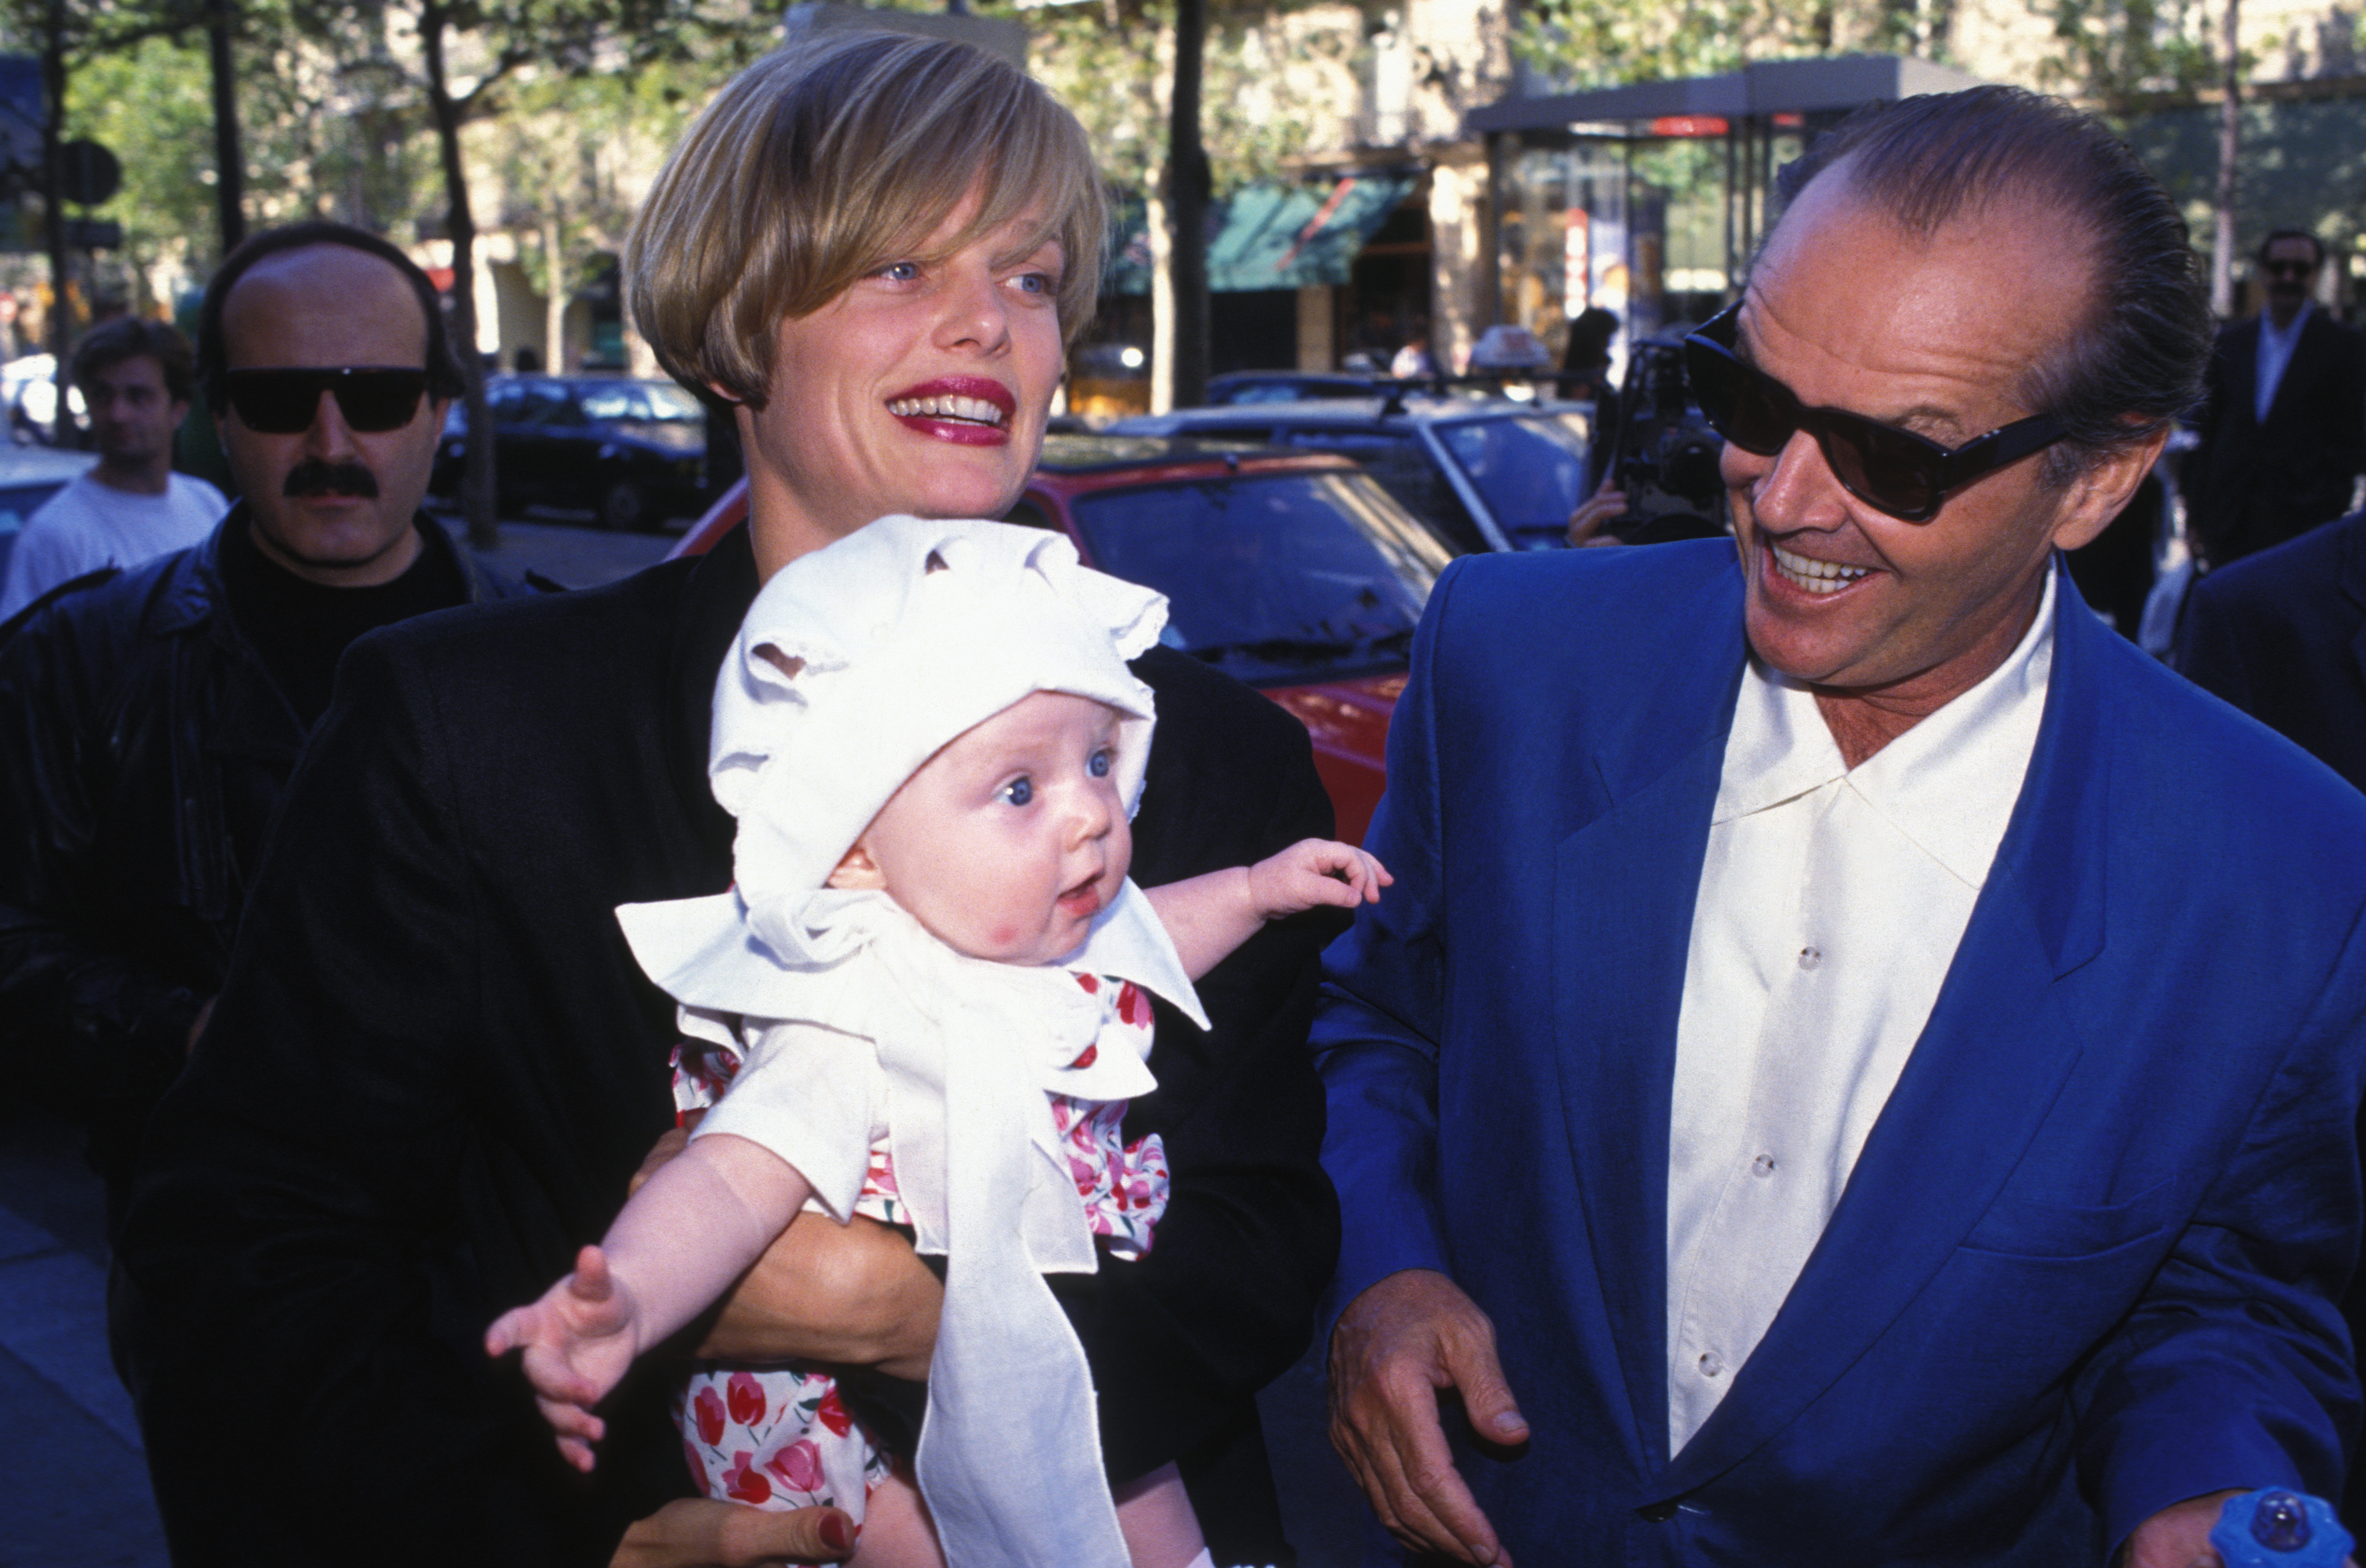 Jack Nicholson and Rebecca Broussard in Paris in 1994 | Source: Getty Images